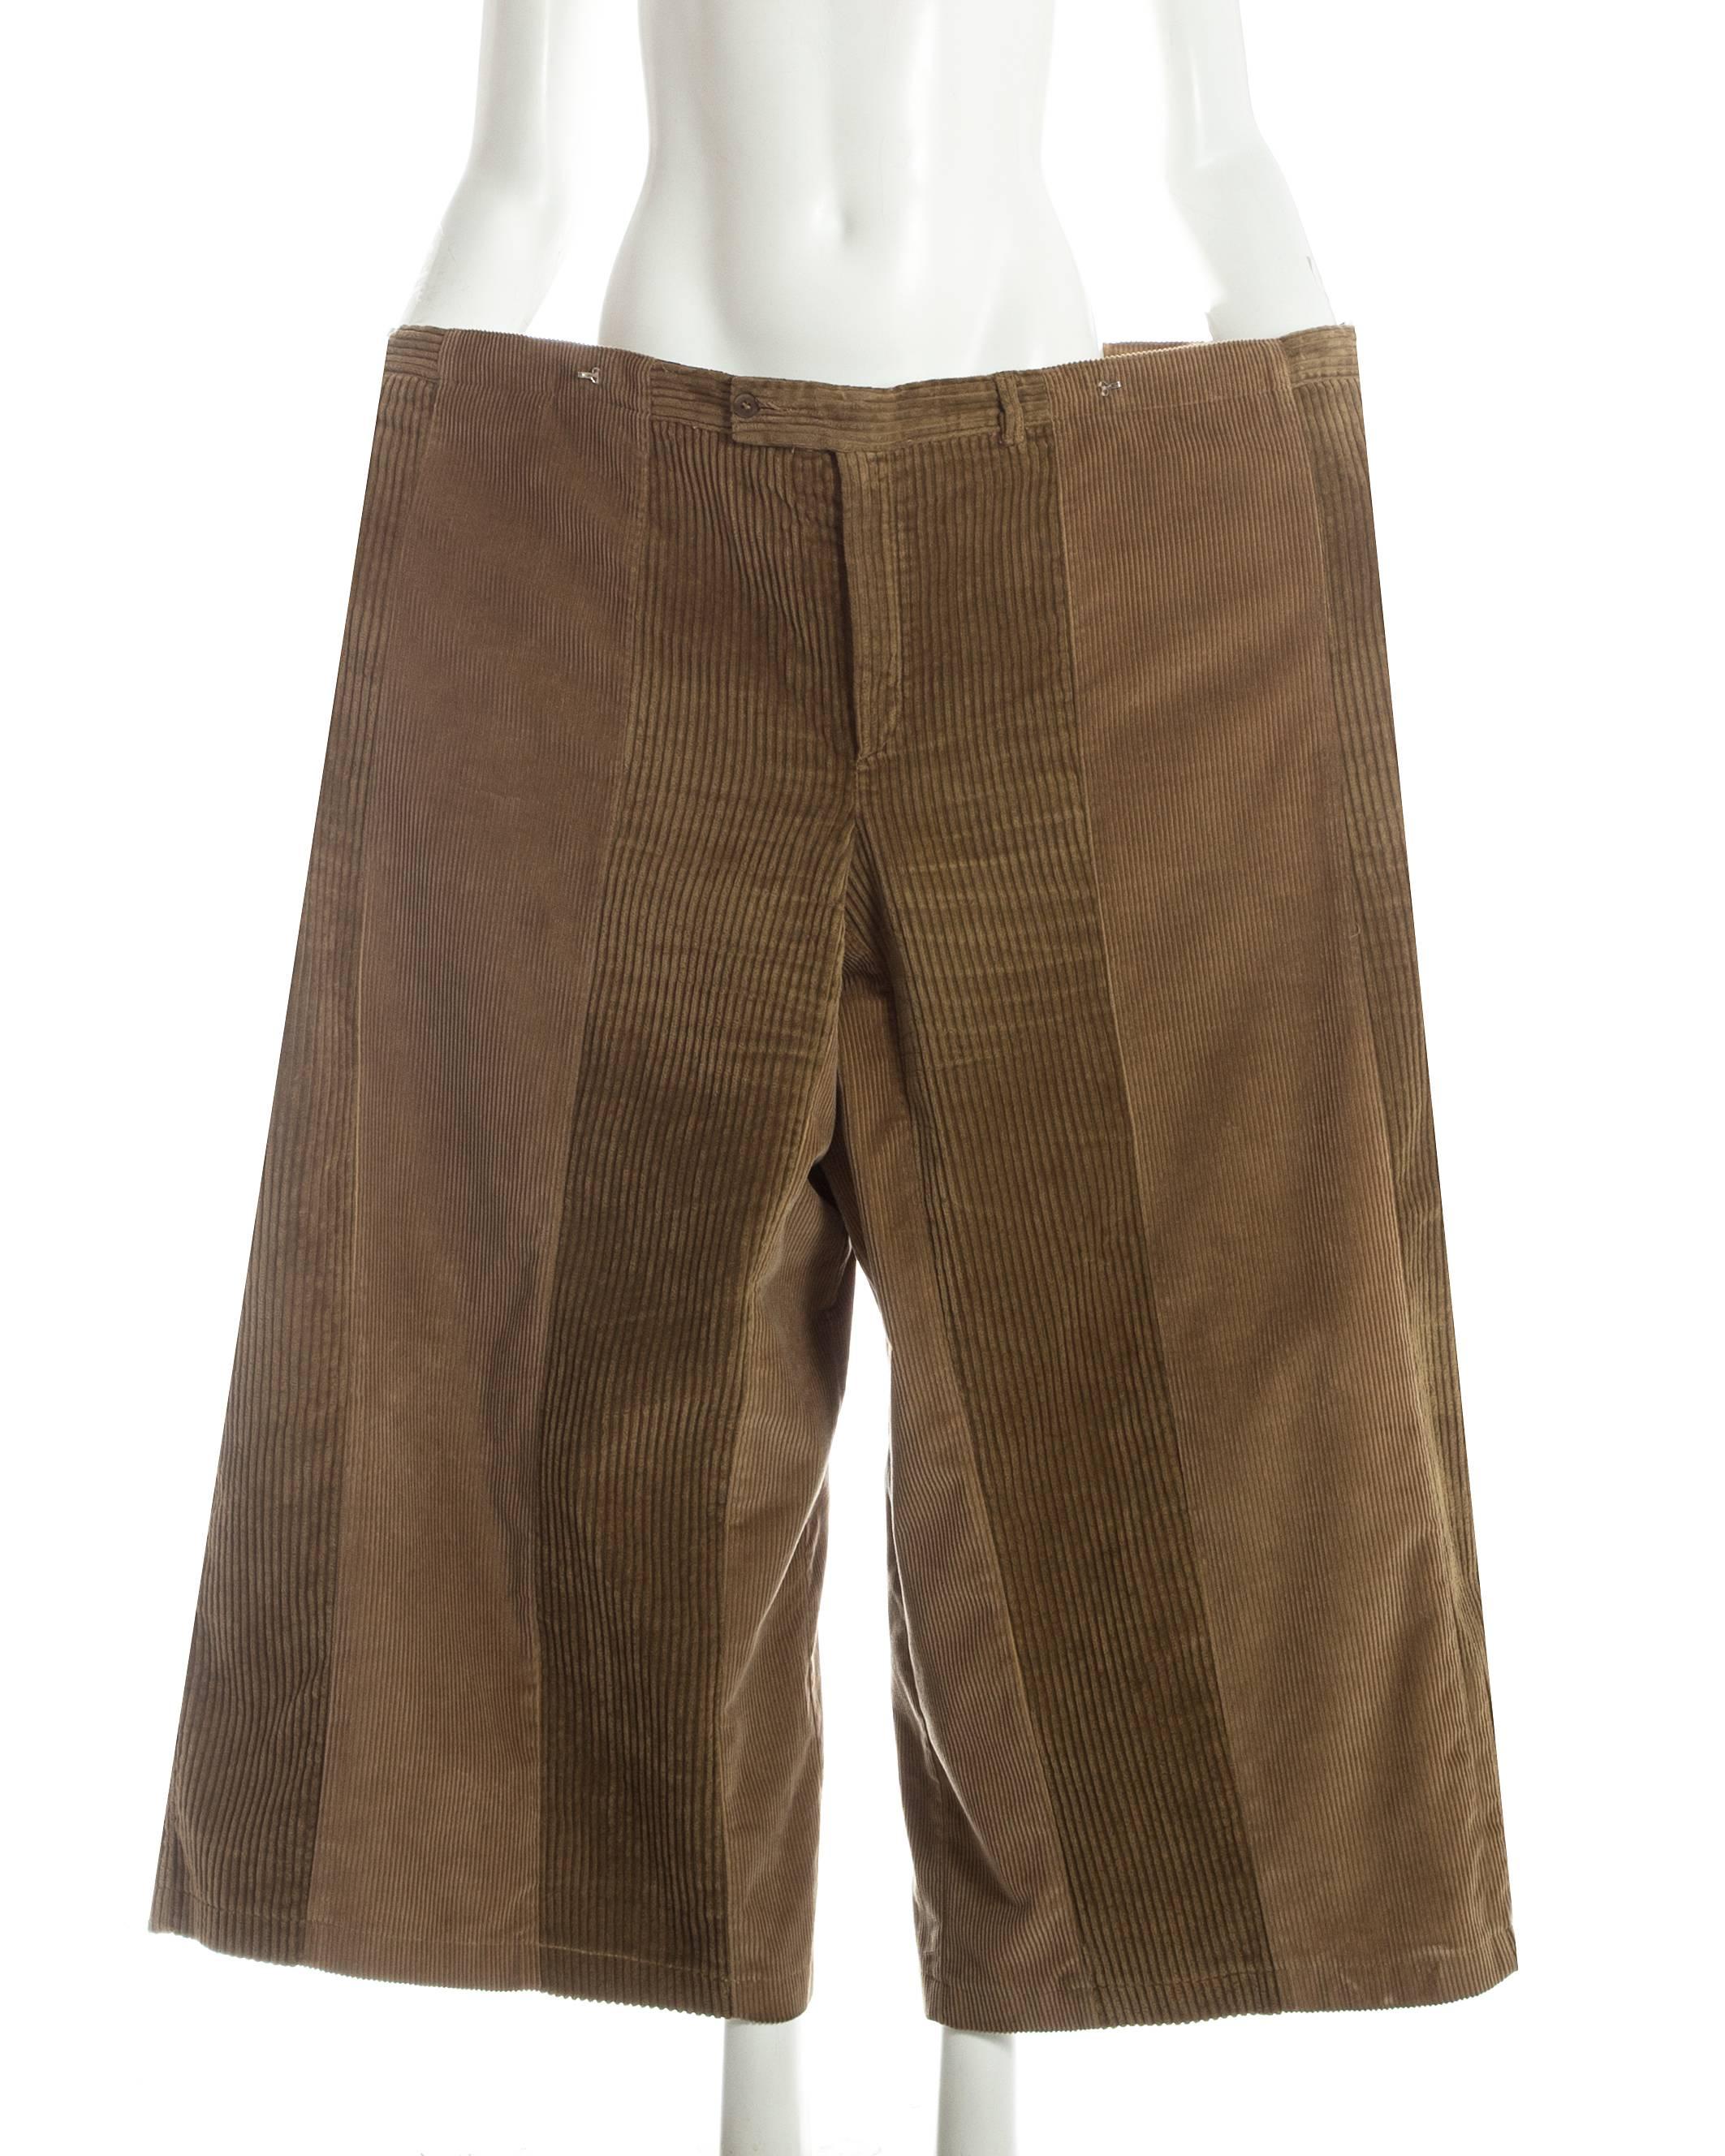 - XXXXL laid flat 
- metal hook-and-eye closures and a belt button fastening inside allow the wear to manipulate the size 
- can be styled in multiple ways 
- made from two pairs of vintage corduroy pants 
- collectors item

ca. 2000-3